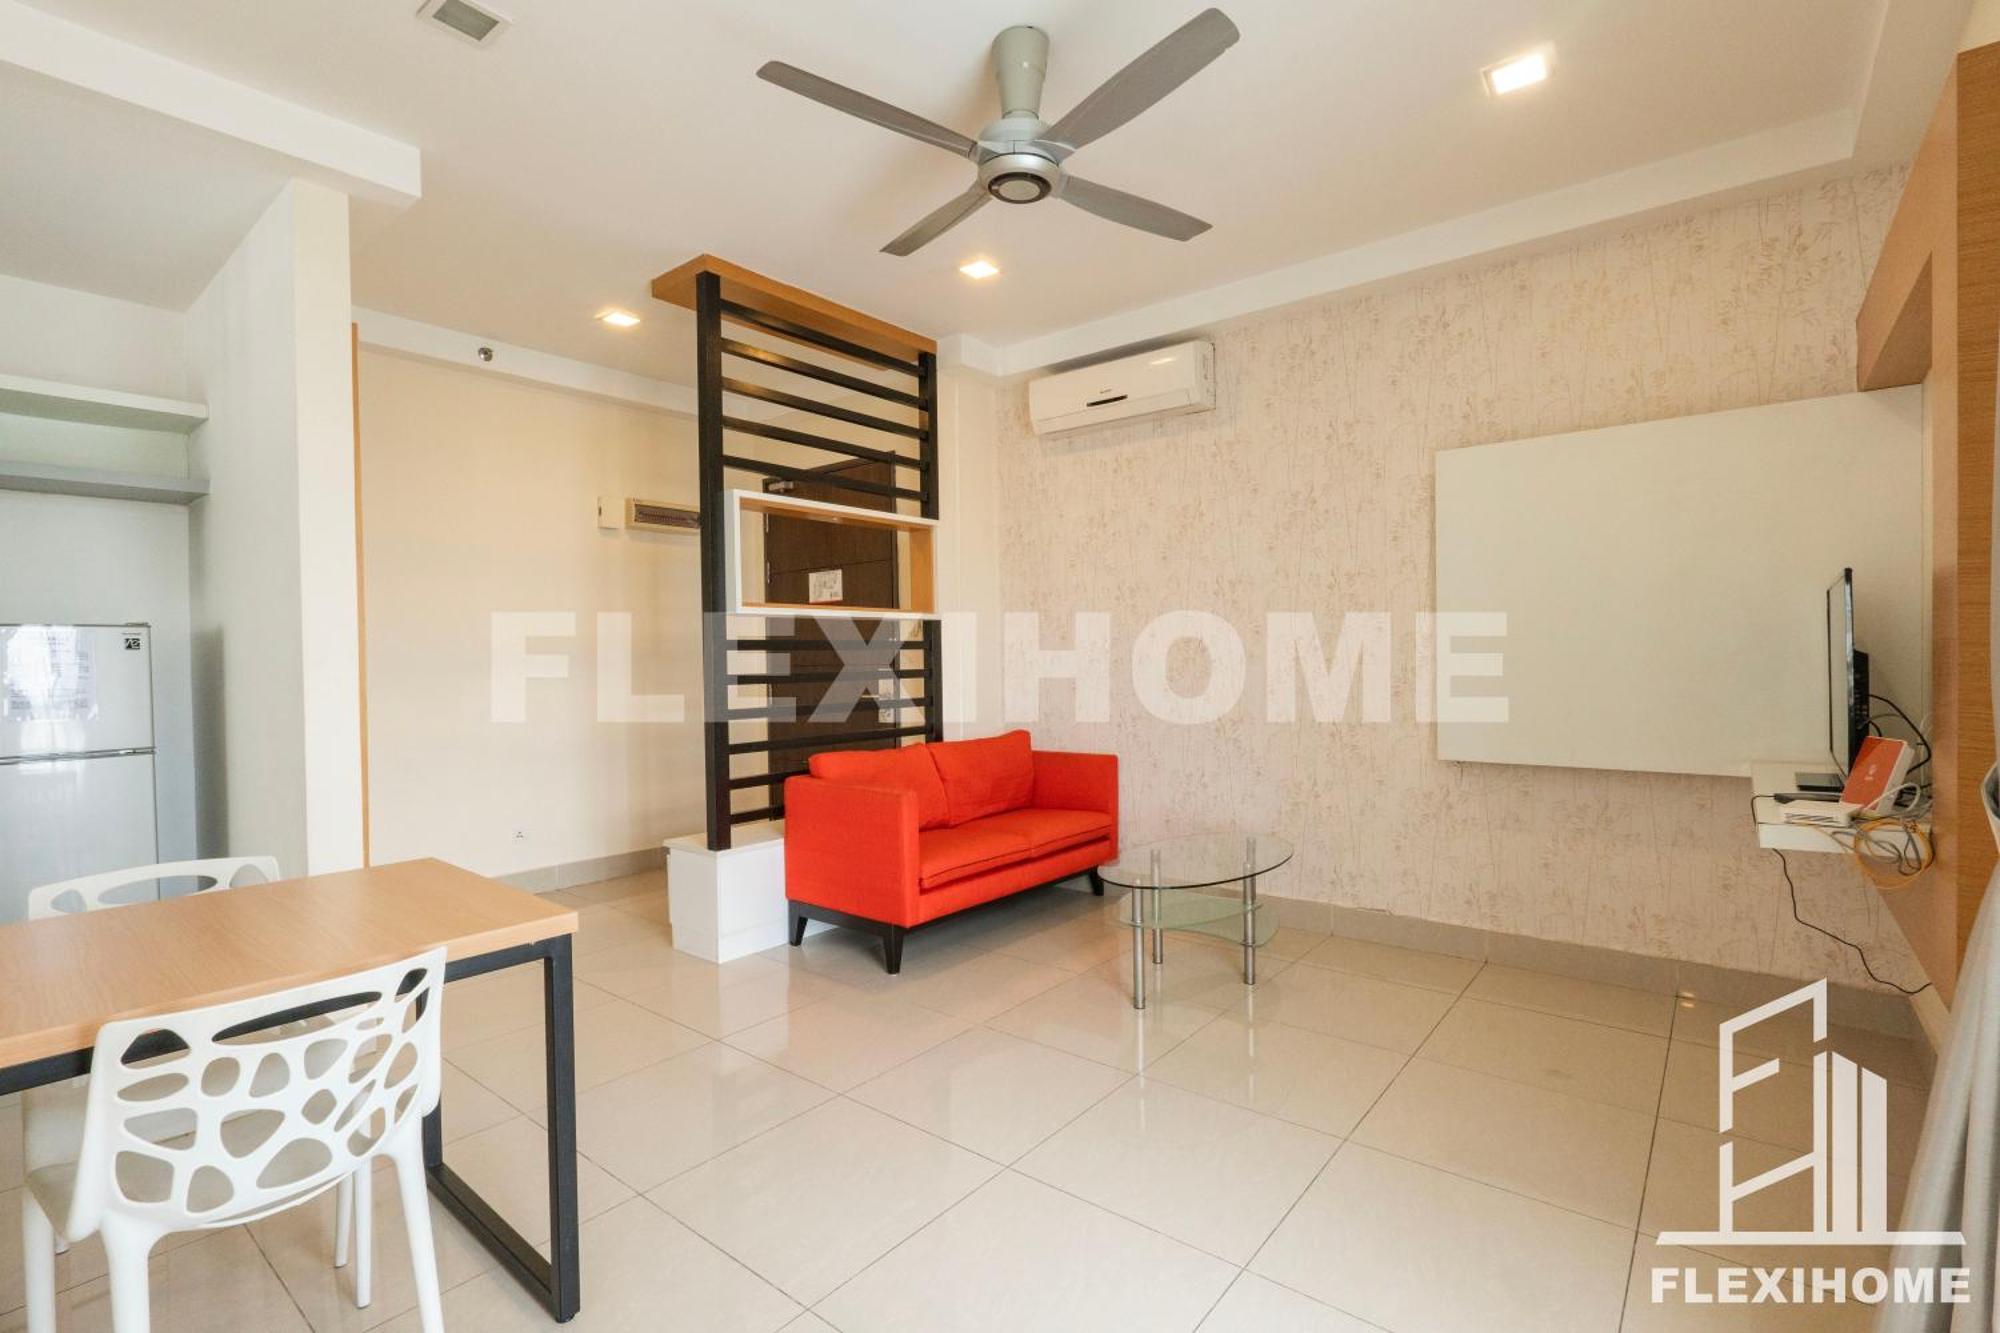 9Am-5Pm, Same Day Check In And Check Out, Work From Home, Shaftsbury-Cyberjaya, Comfy Home By Flexihome-My Kültér fotó